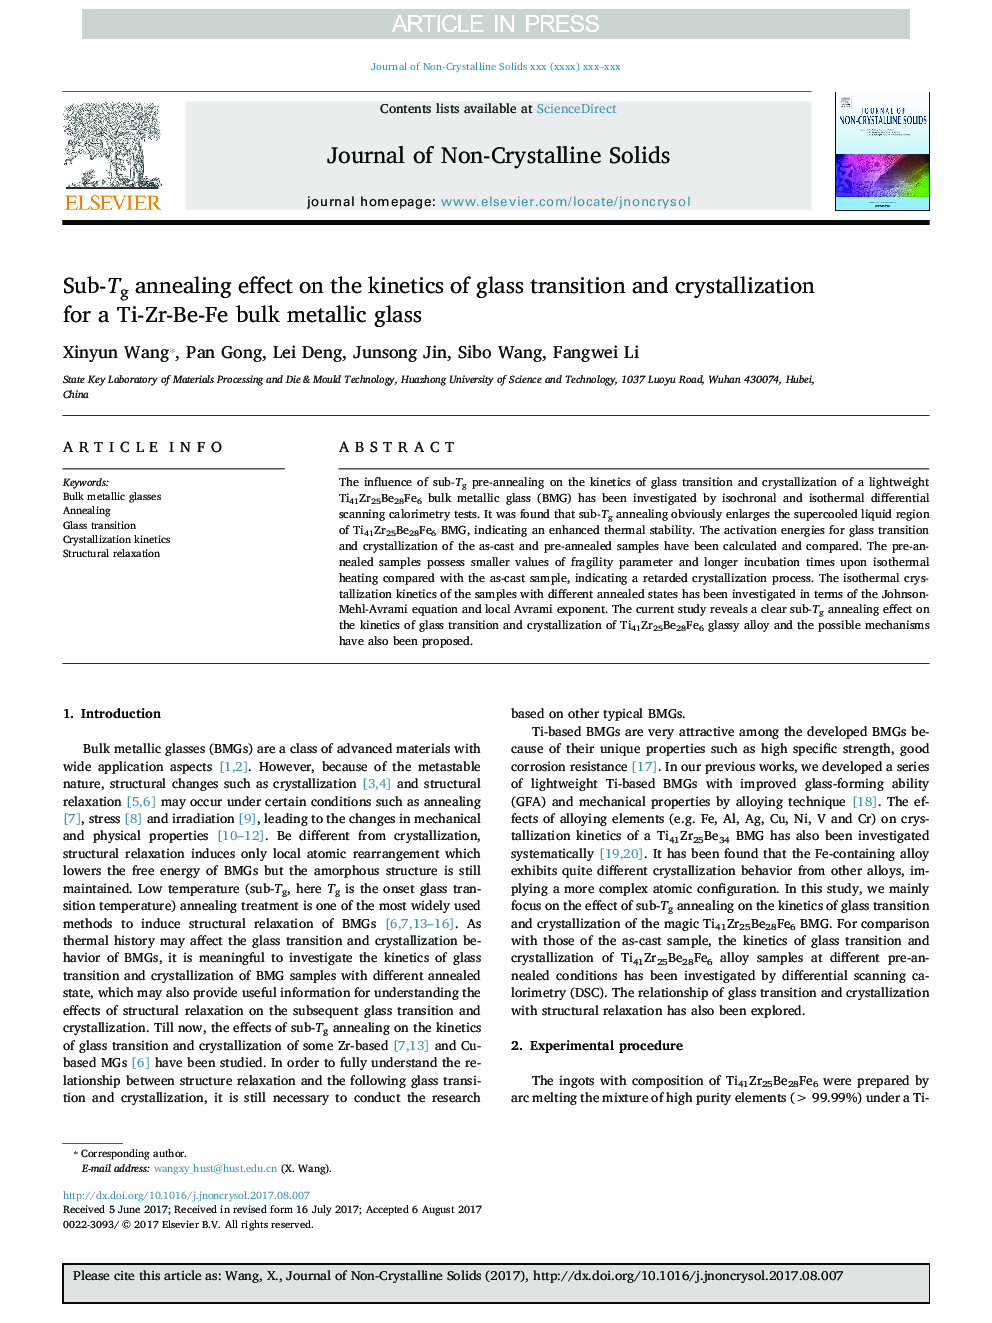 Sub-Tg annealing effect on the kinetics of glass transition and crystallization for a Ti-Zr-Be-Fe bulk metallic glass